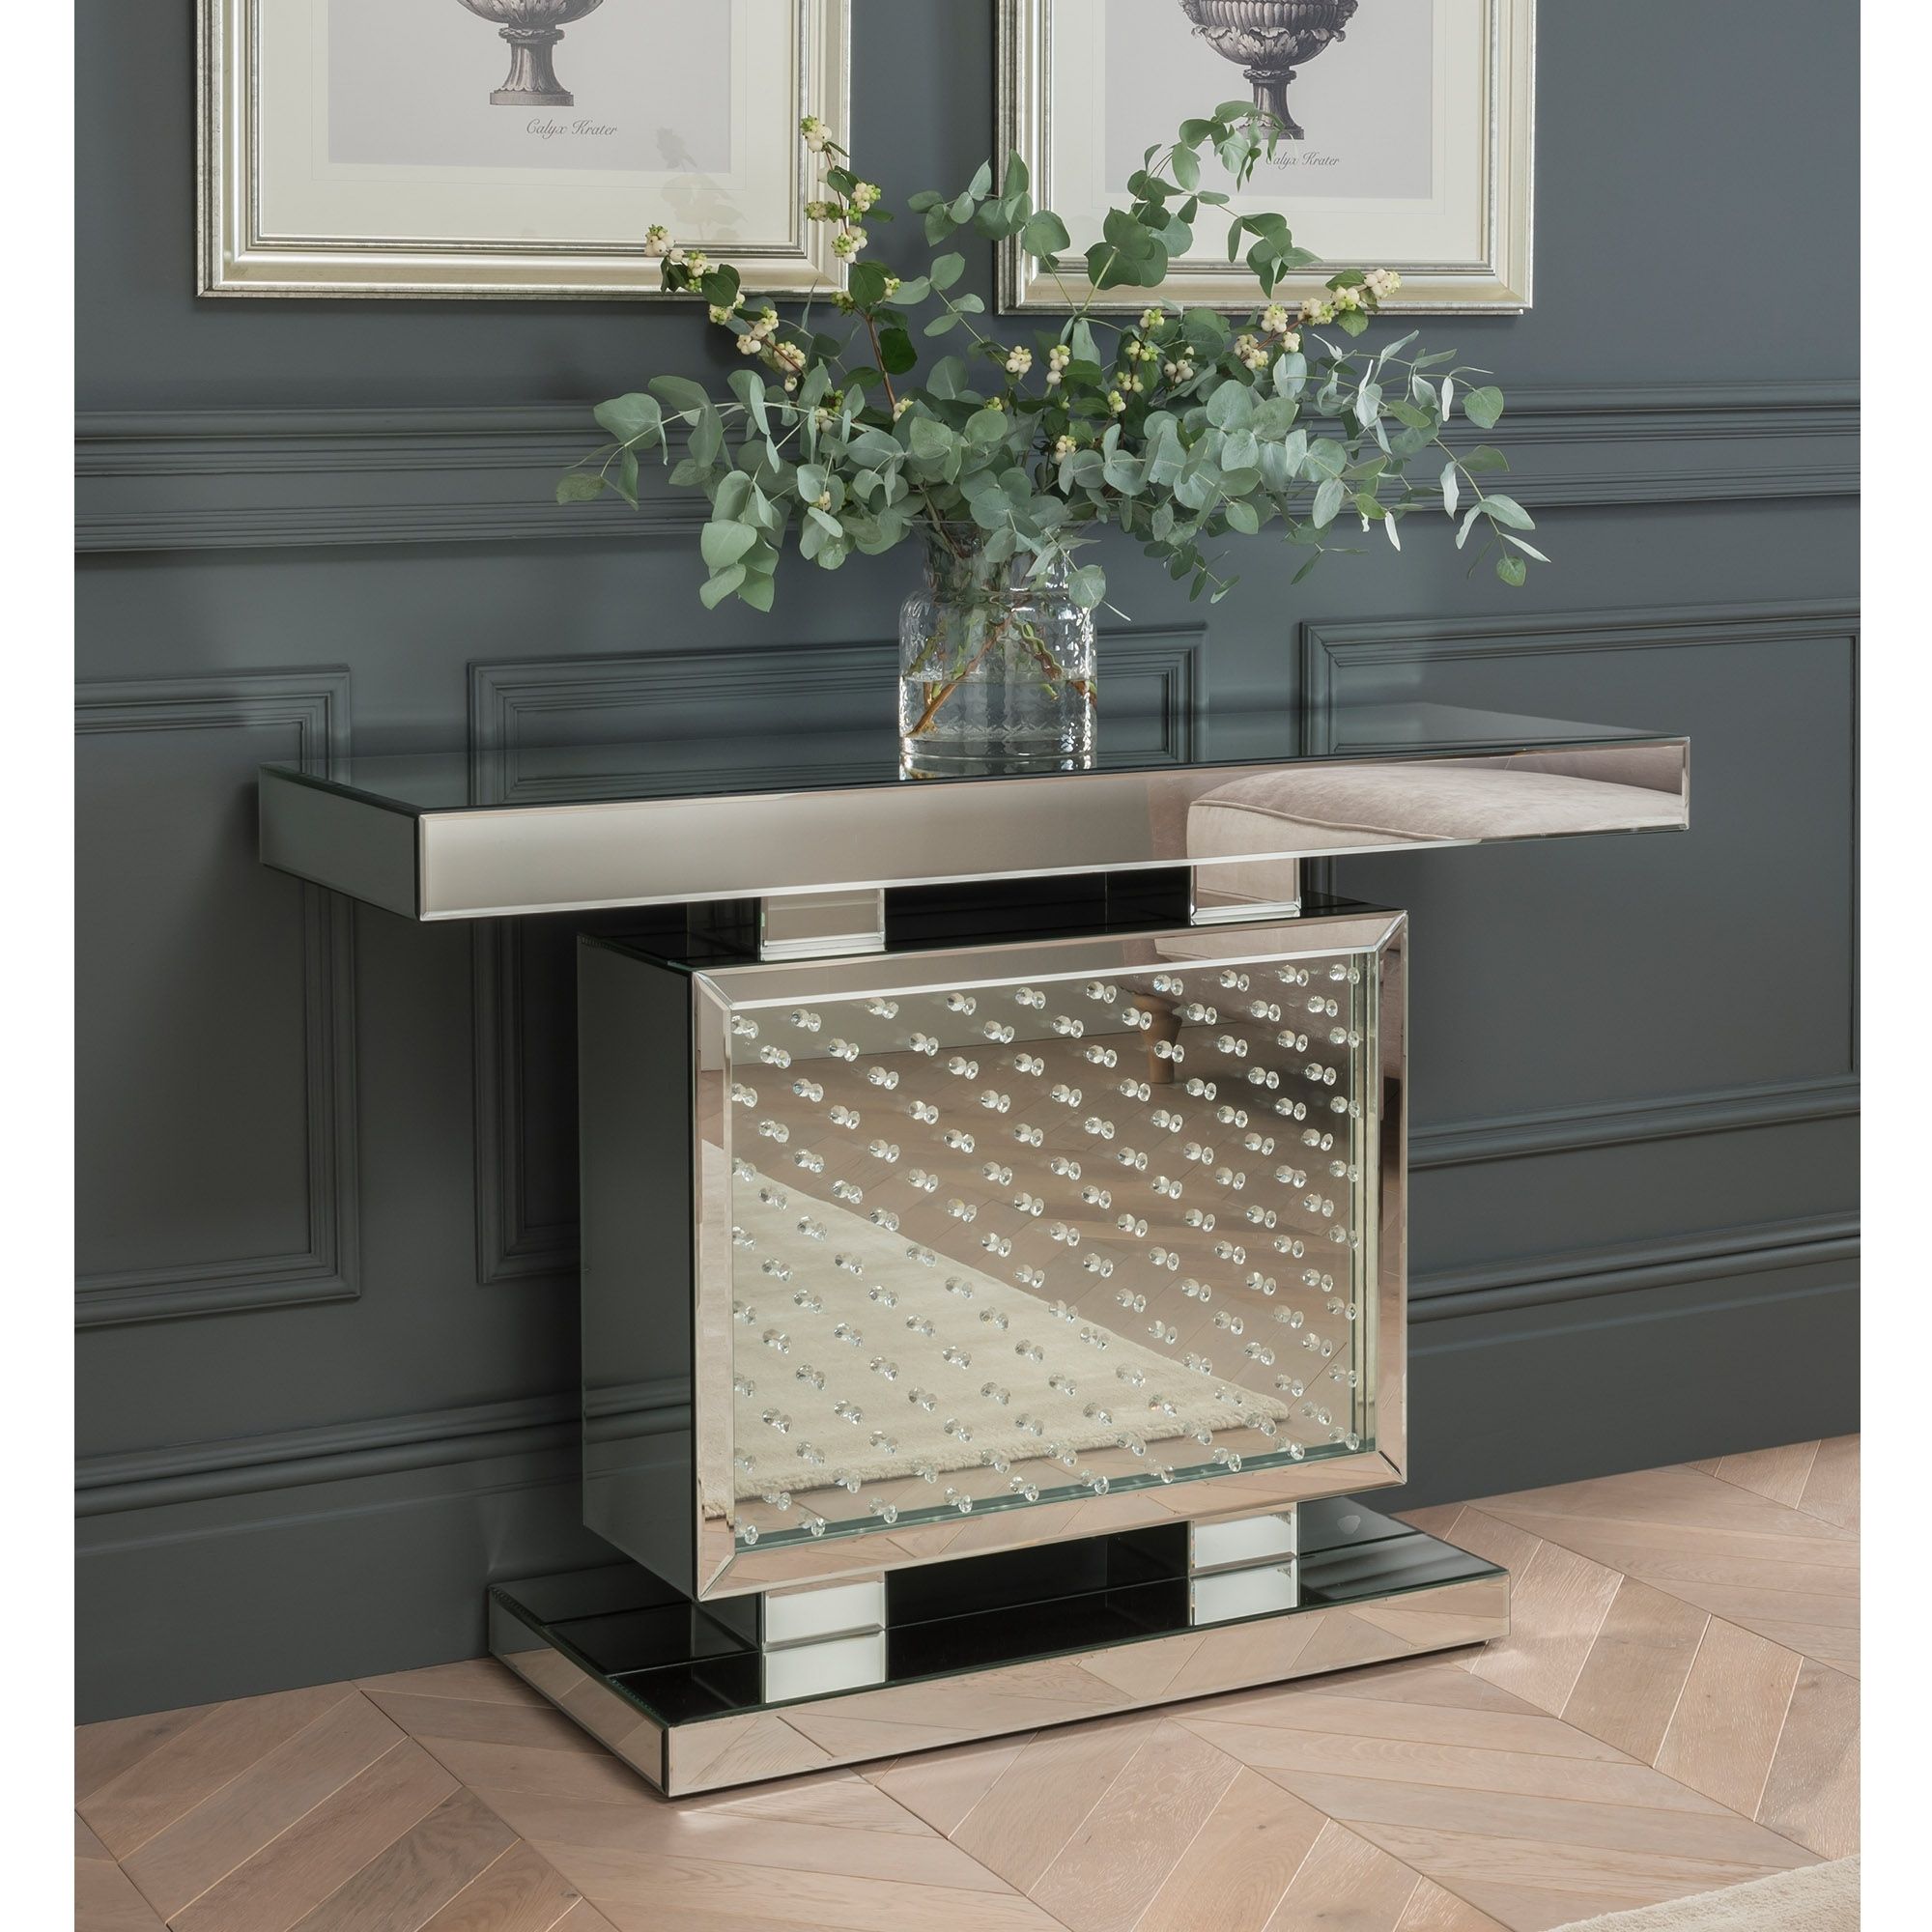 Venetian Mirrored Console Table | Mirrored Glass Furniture Online Now Intended For Glass And Pewter Console Tables (View 9 of 20)